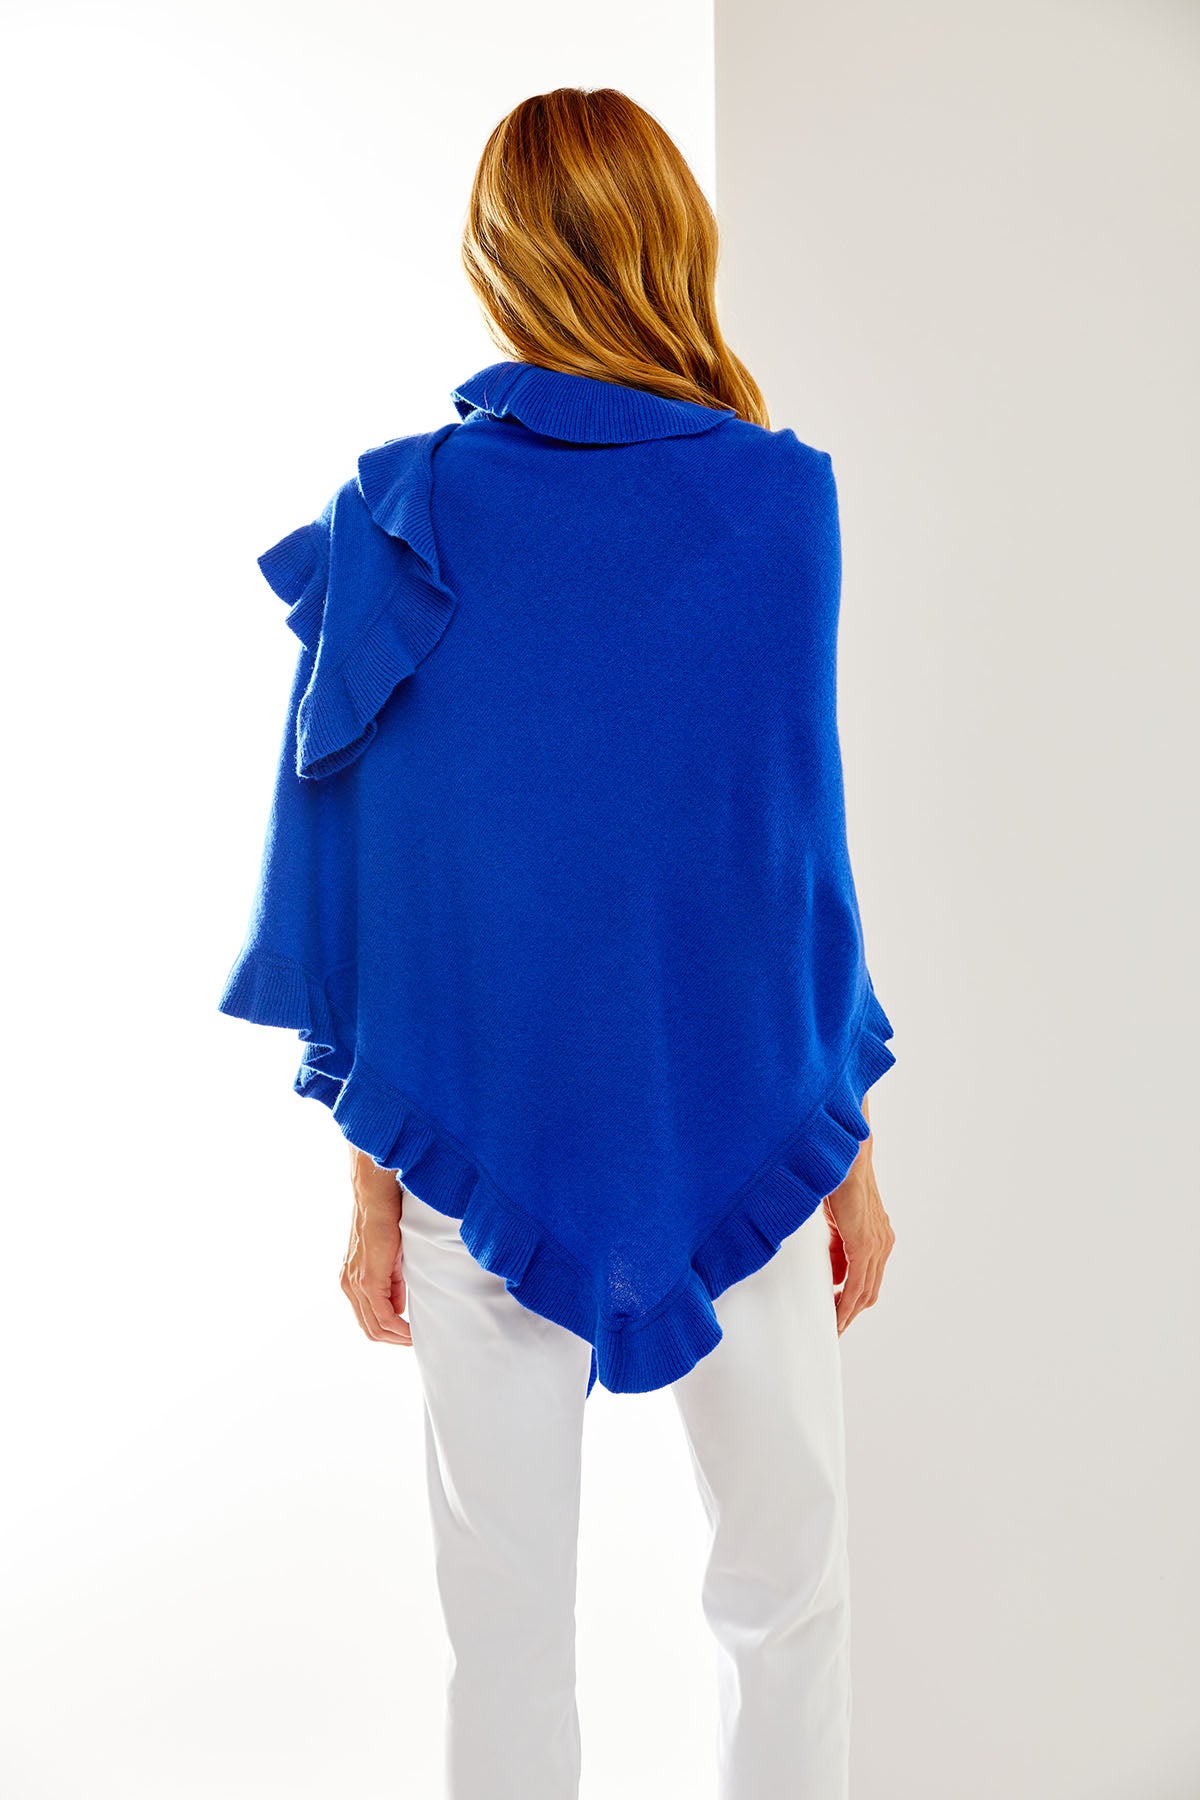 Marine Blue cashmere wrap with ruffle edge. Perfect for everyday wear and as a cocktail attire accessory